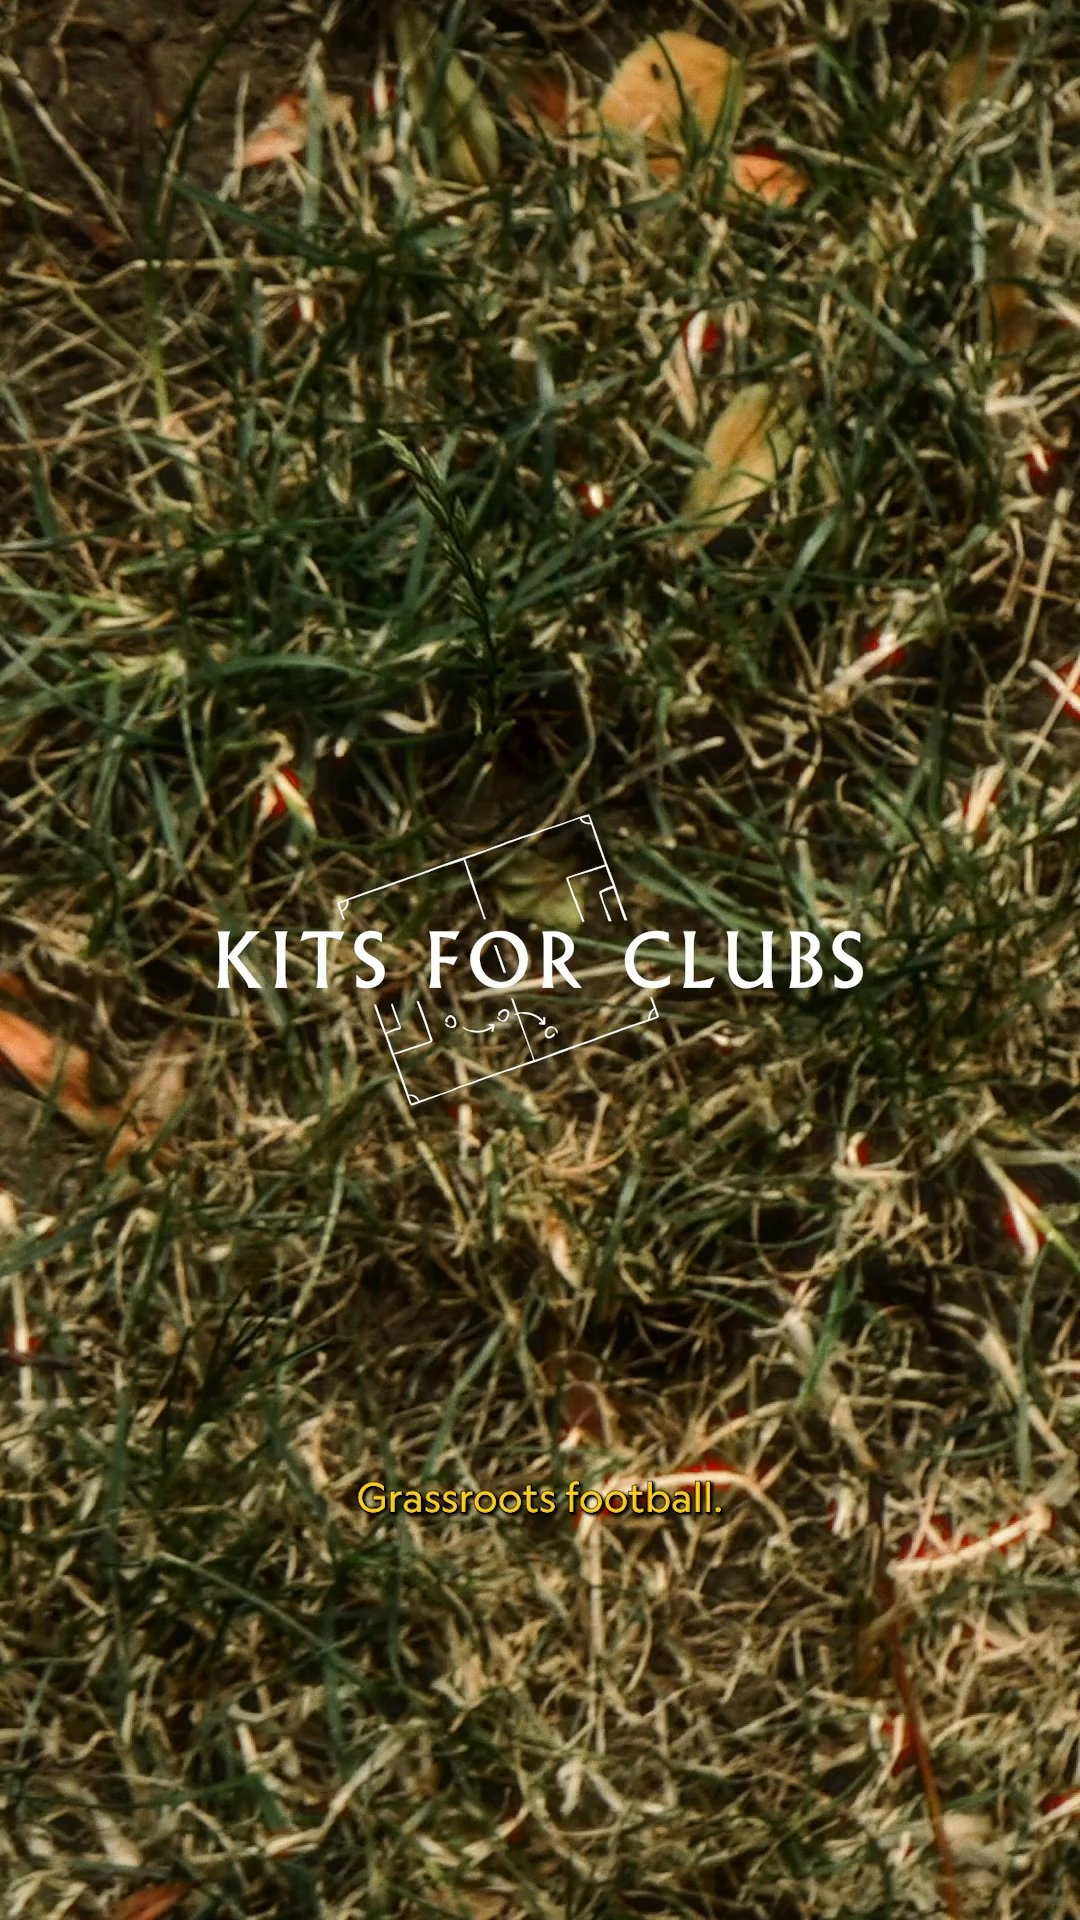 Lyle and Scott - Kits for Clubs